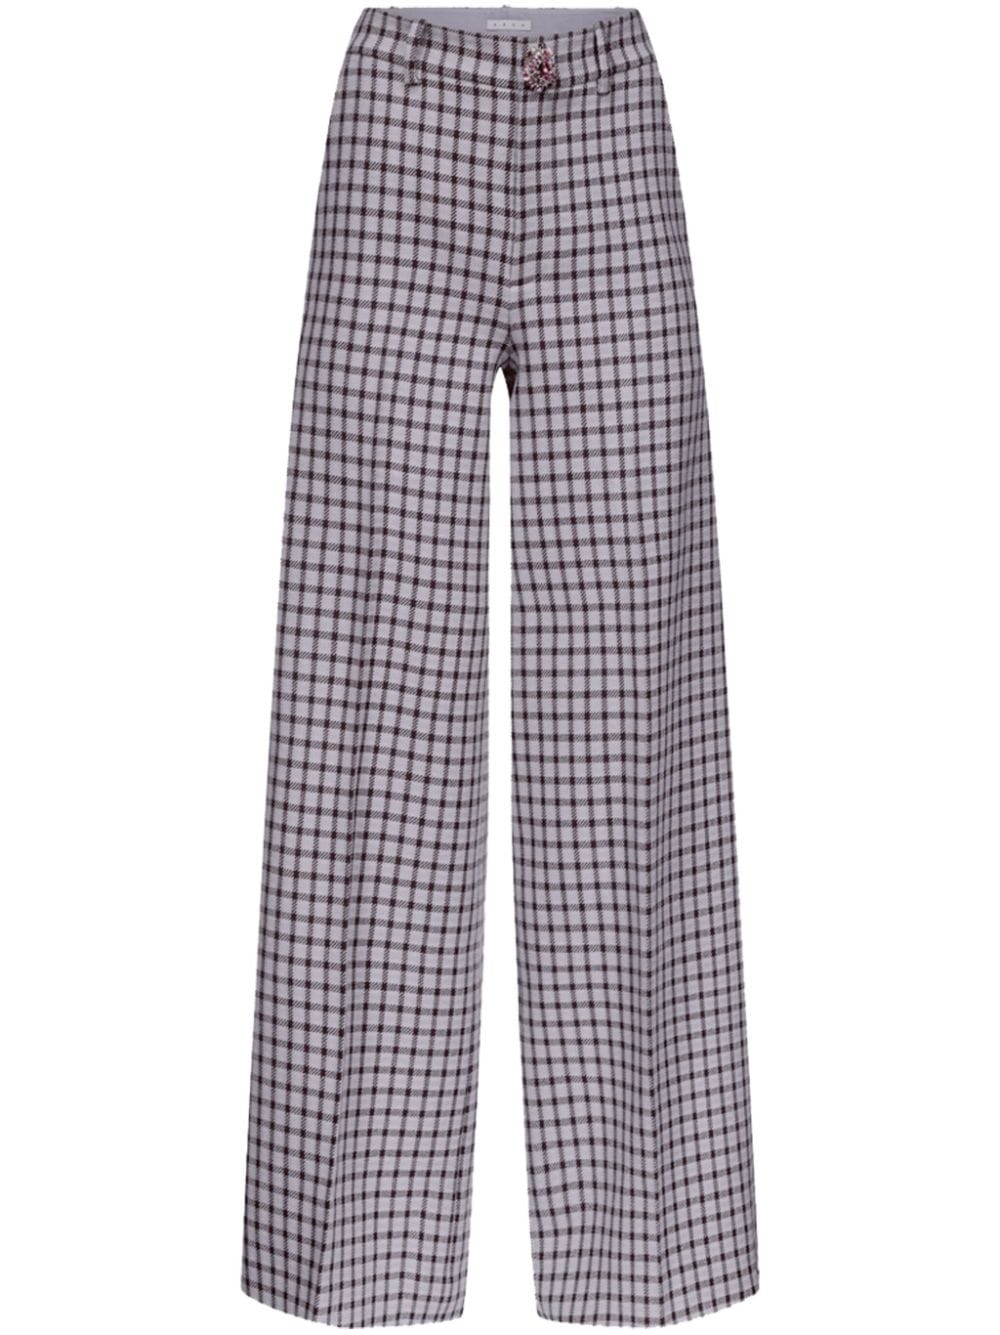 AREA checked wide-leg trousers - Viola